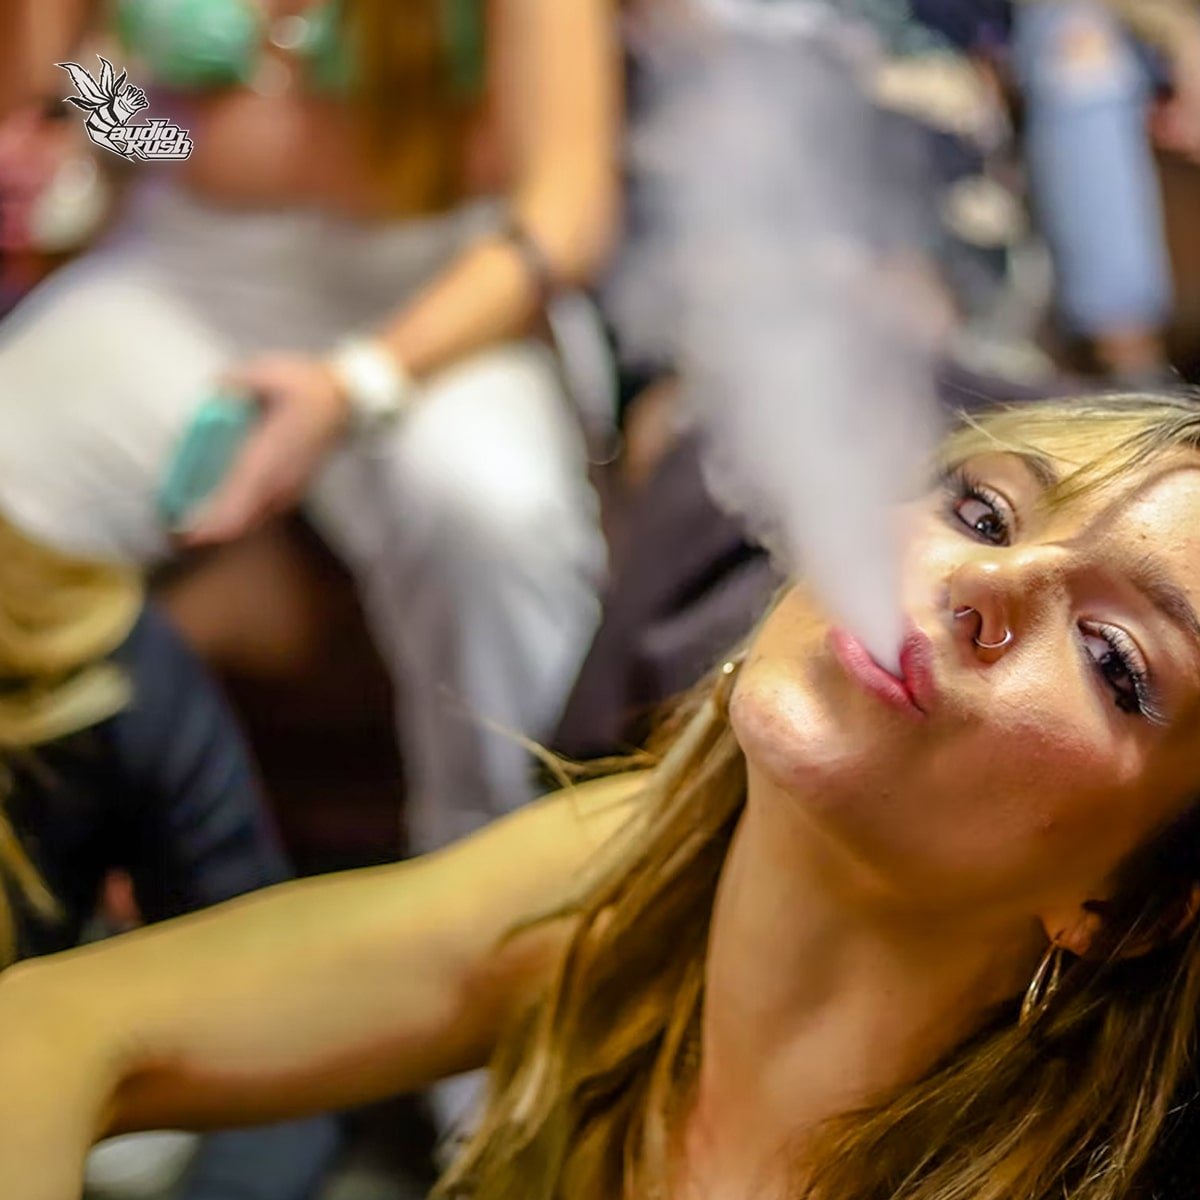 5 best activities to do while stoned on cannabis - be social